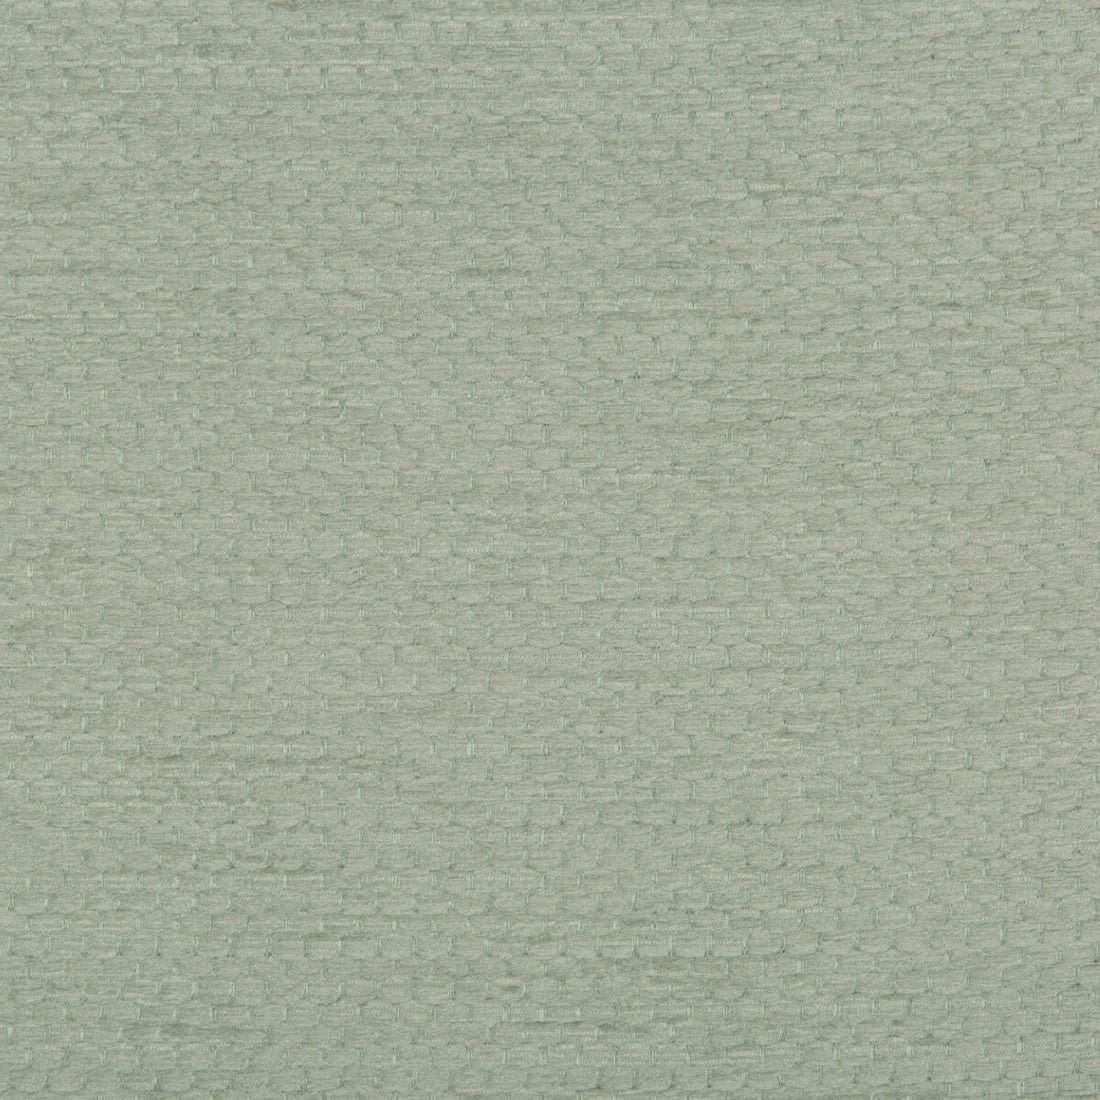 Reserve fabric in sea green color - pattern 35056.30.0 - by Kravet Contract in the Gis Crypton collection